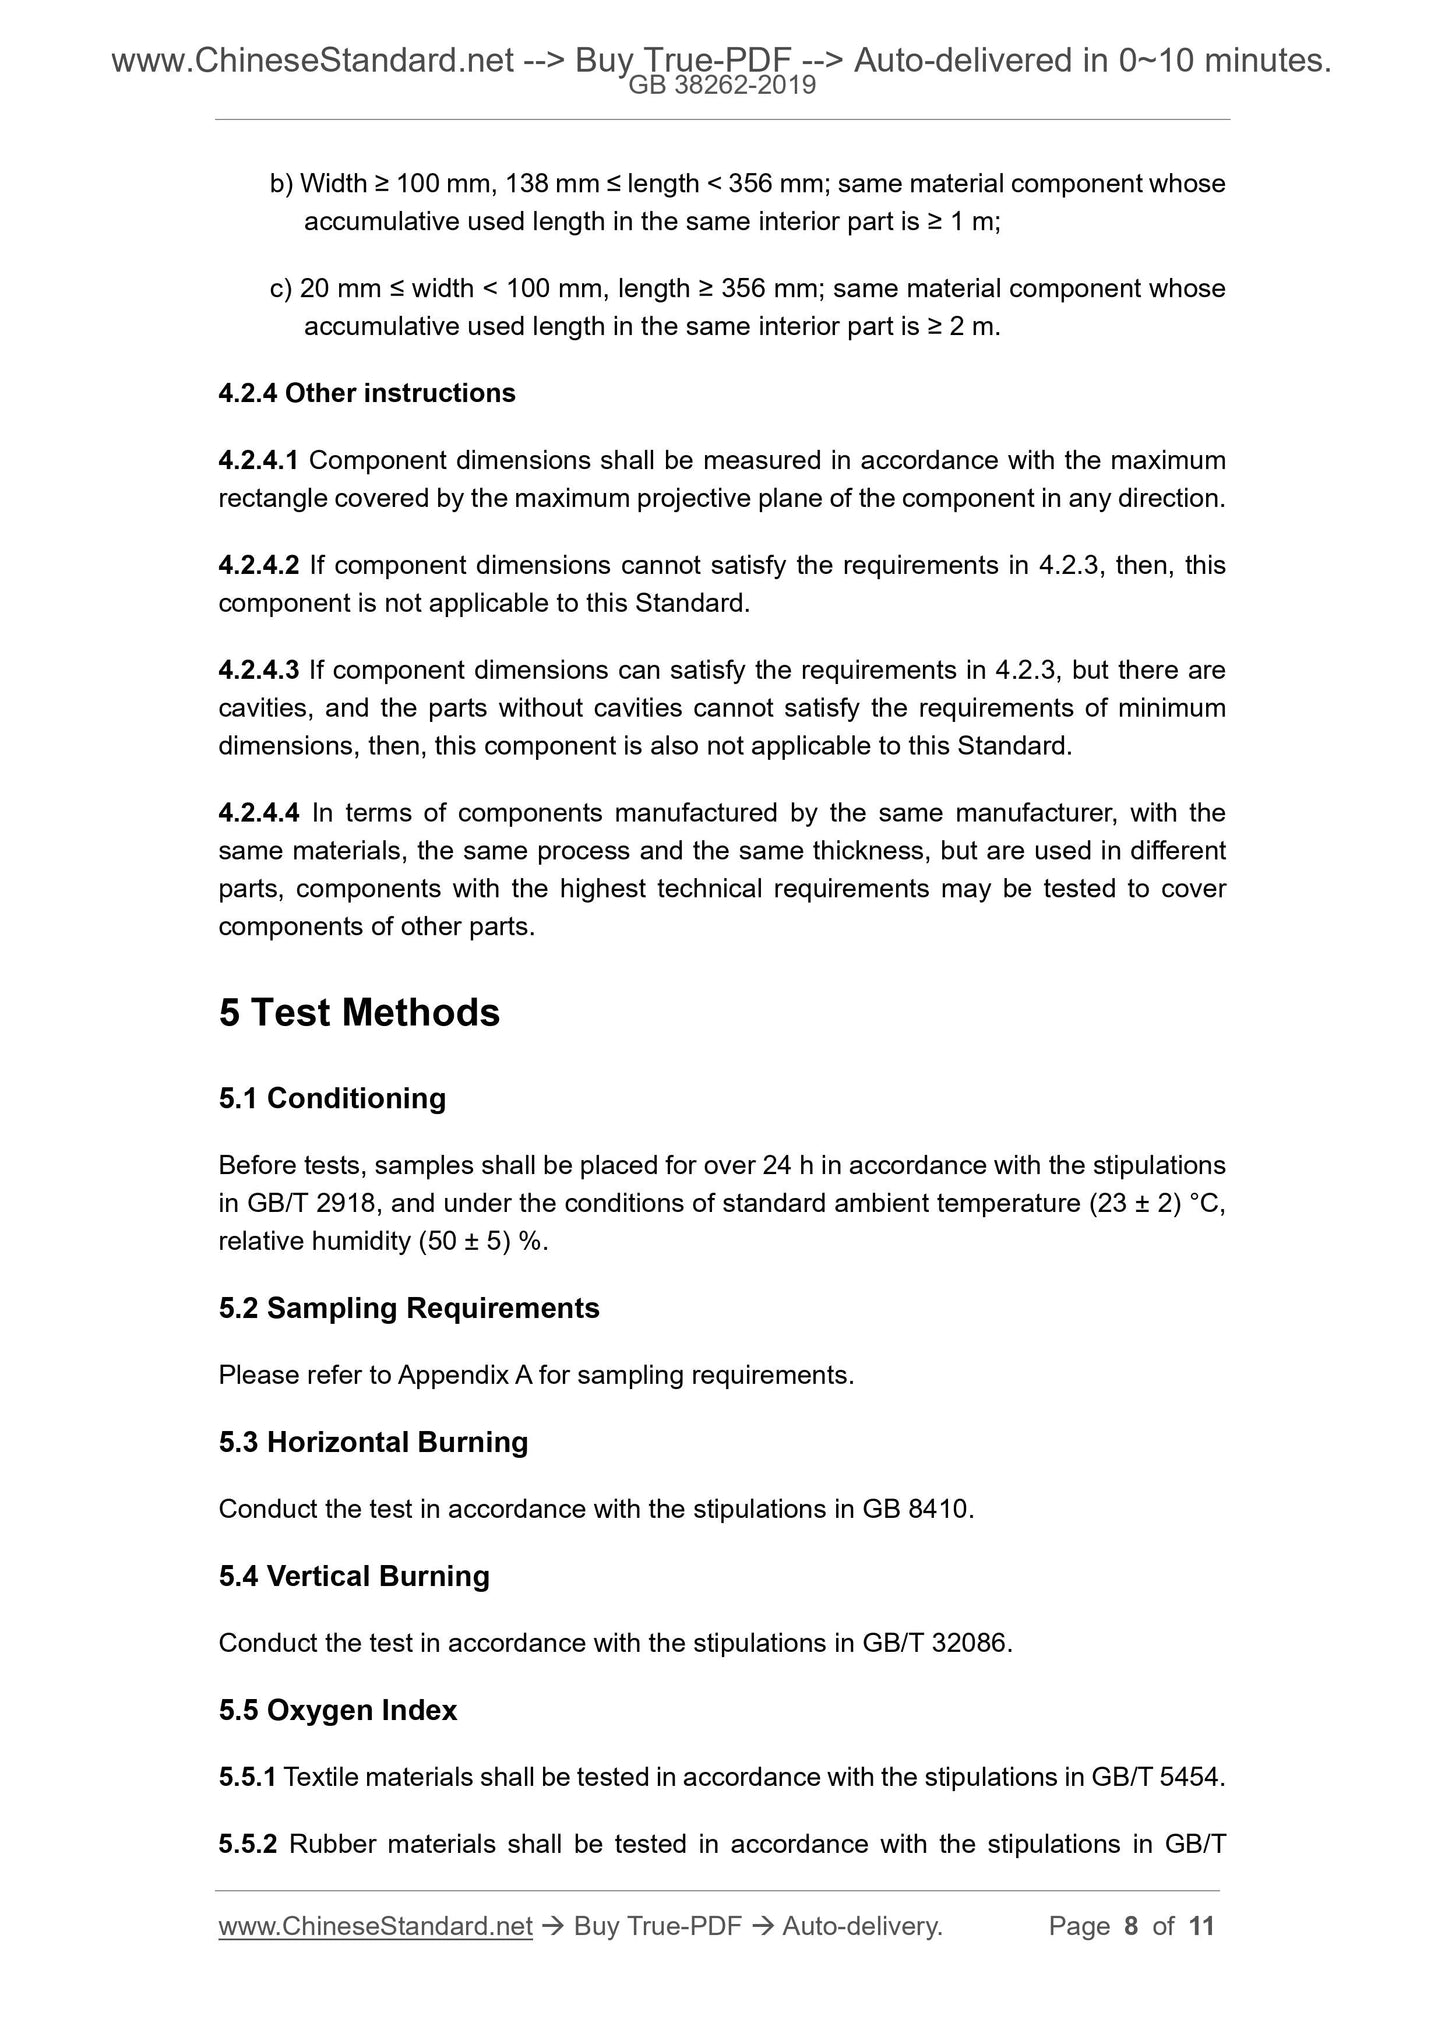 GB 38262-2019 Page 4